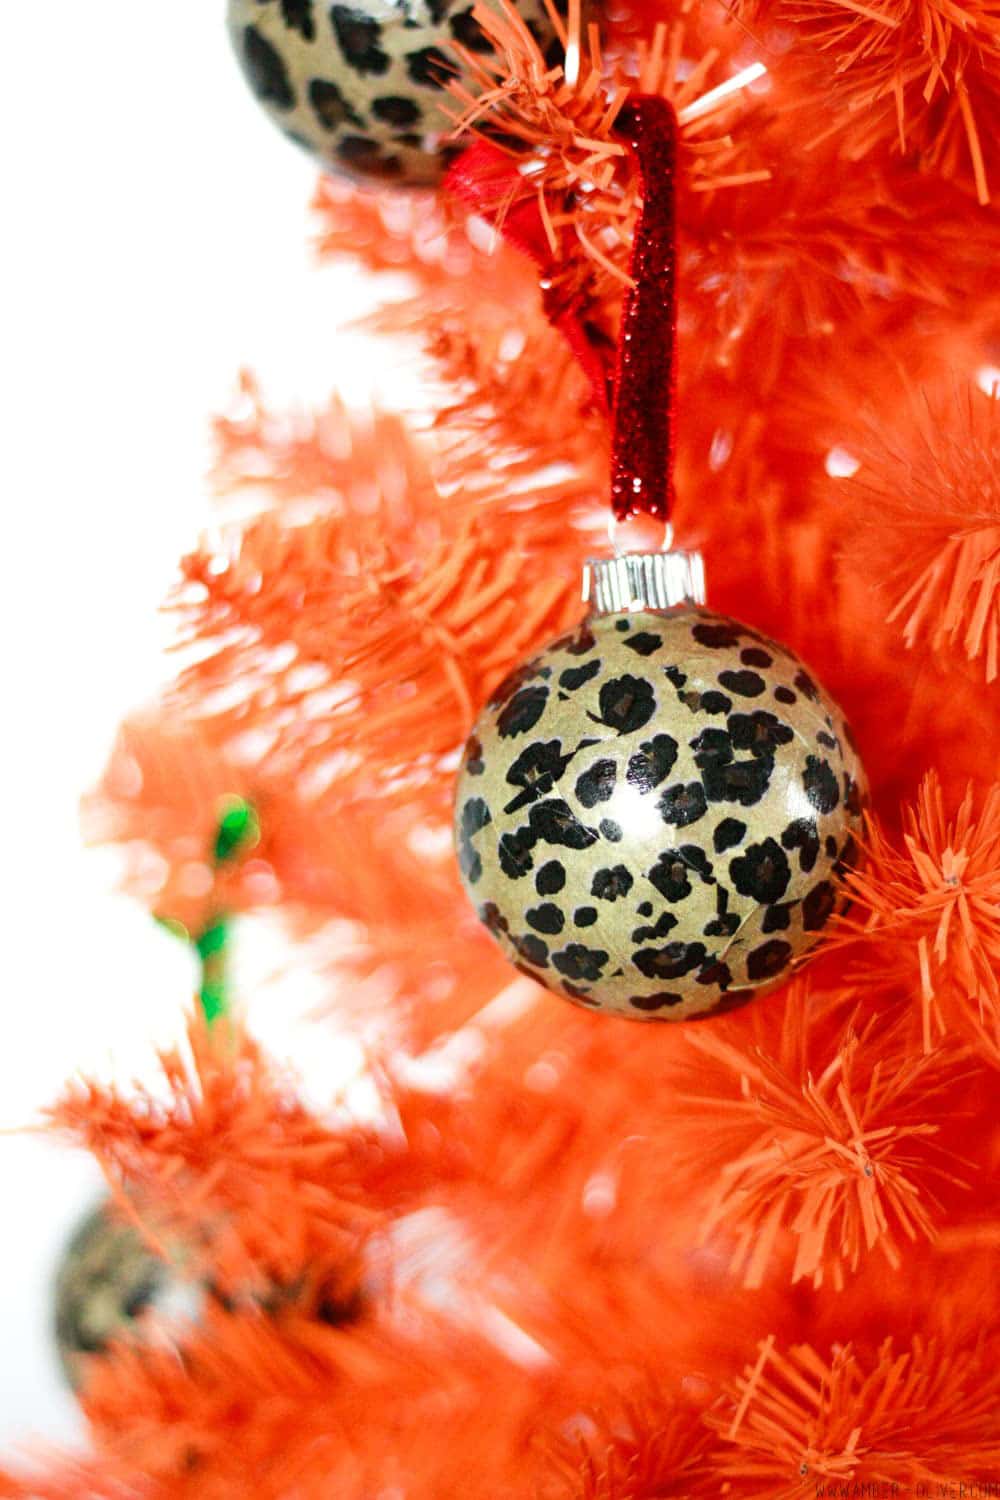 Leopard Print Ornaments Christmas Tree Trimming Decoration 4 Ct